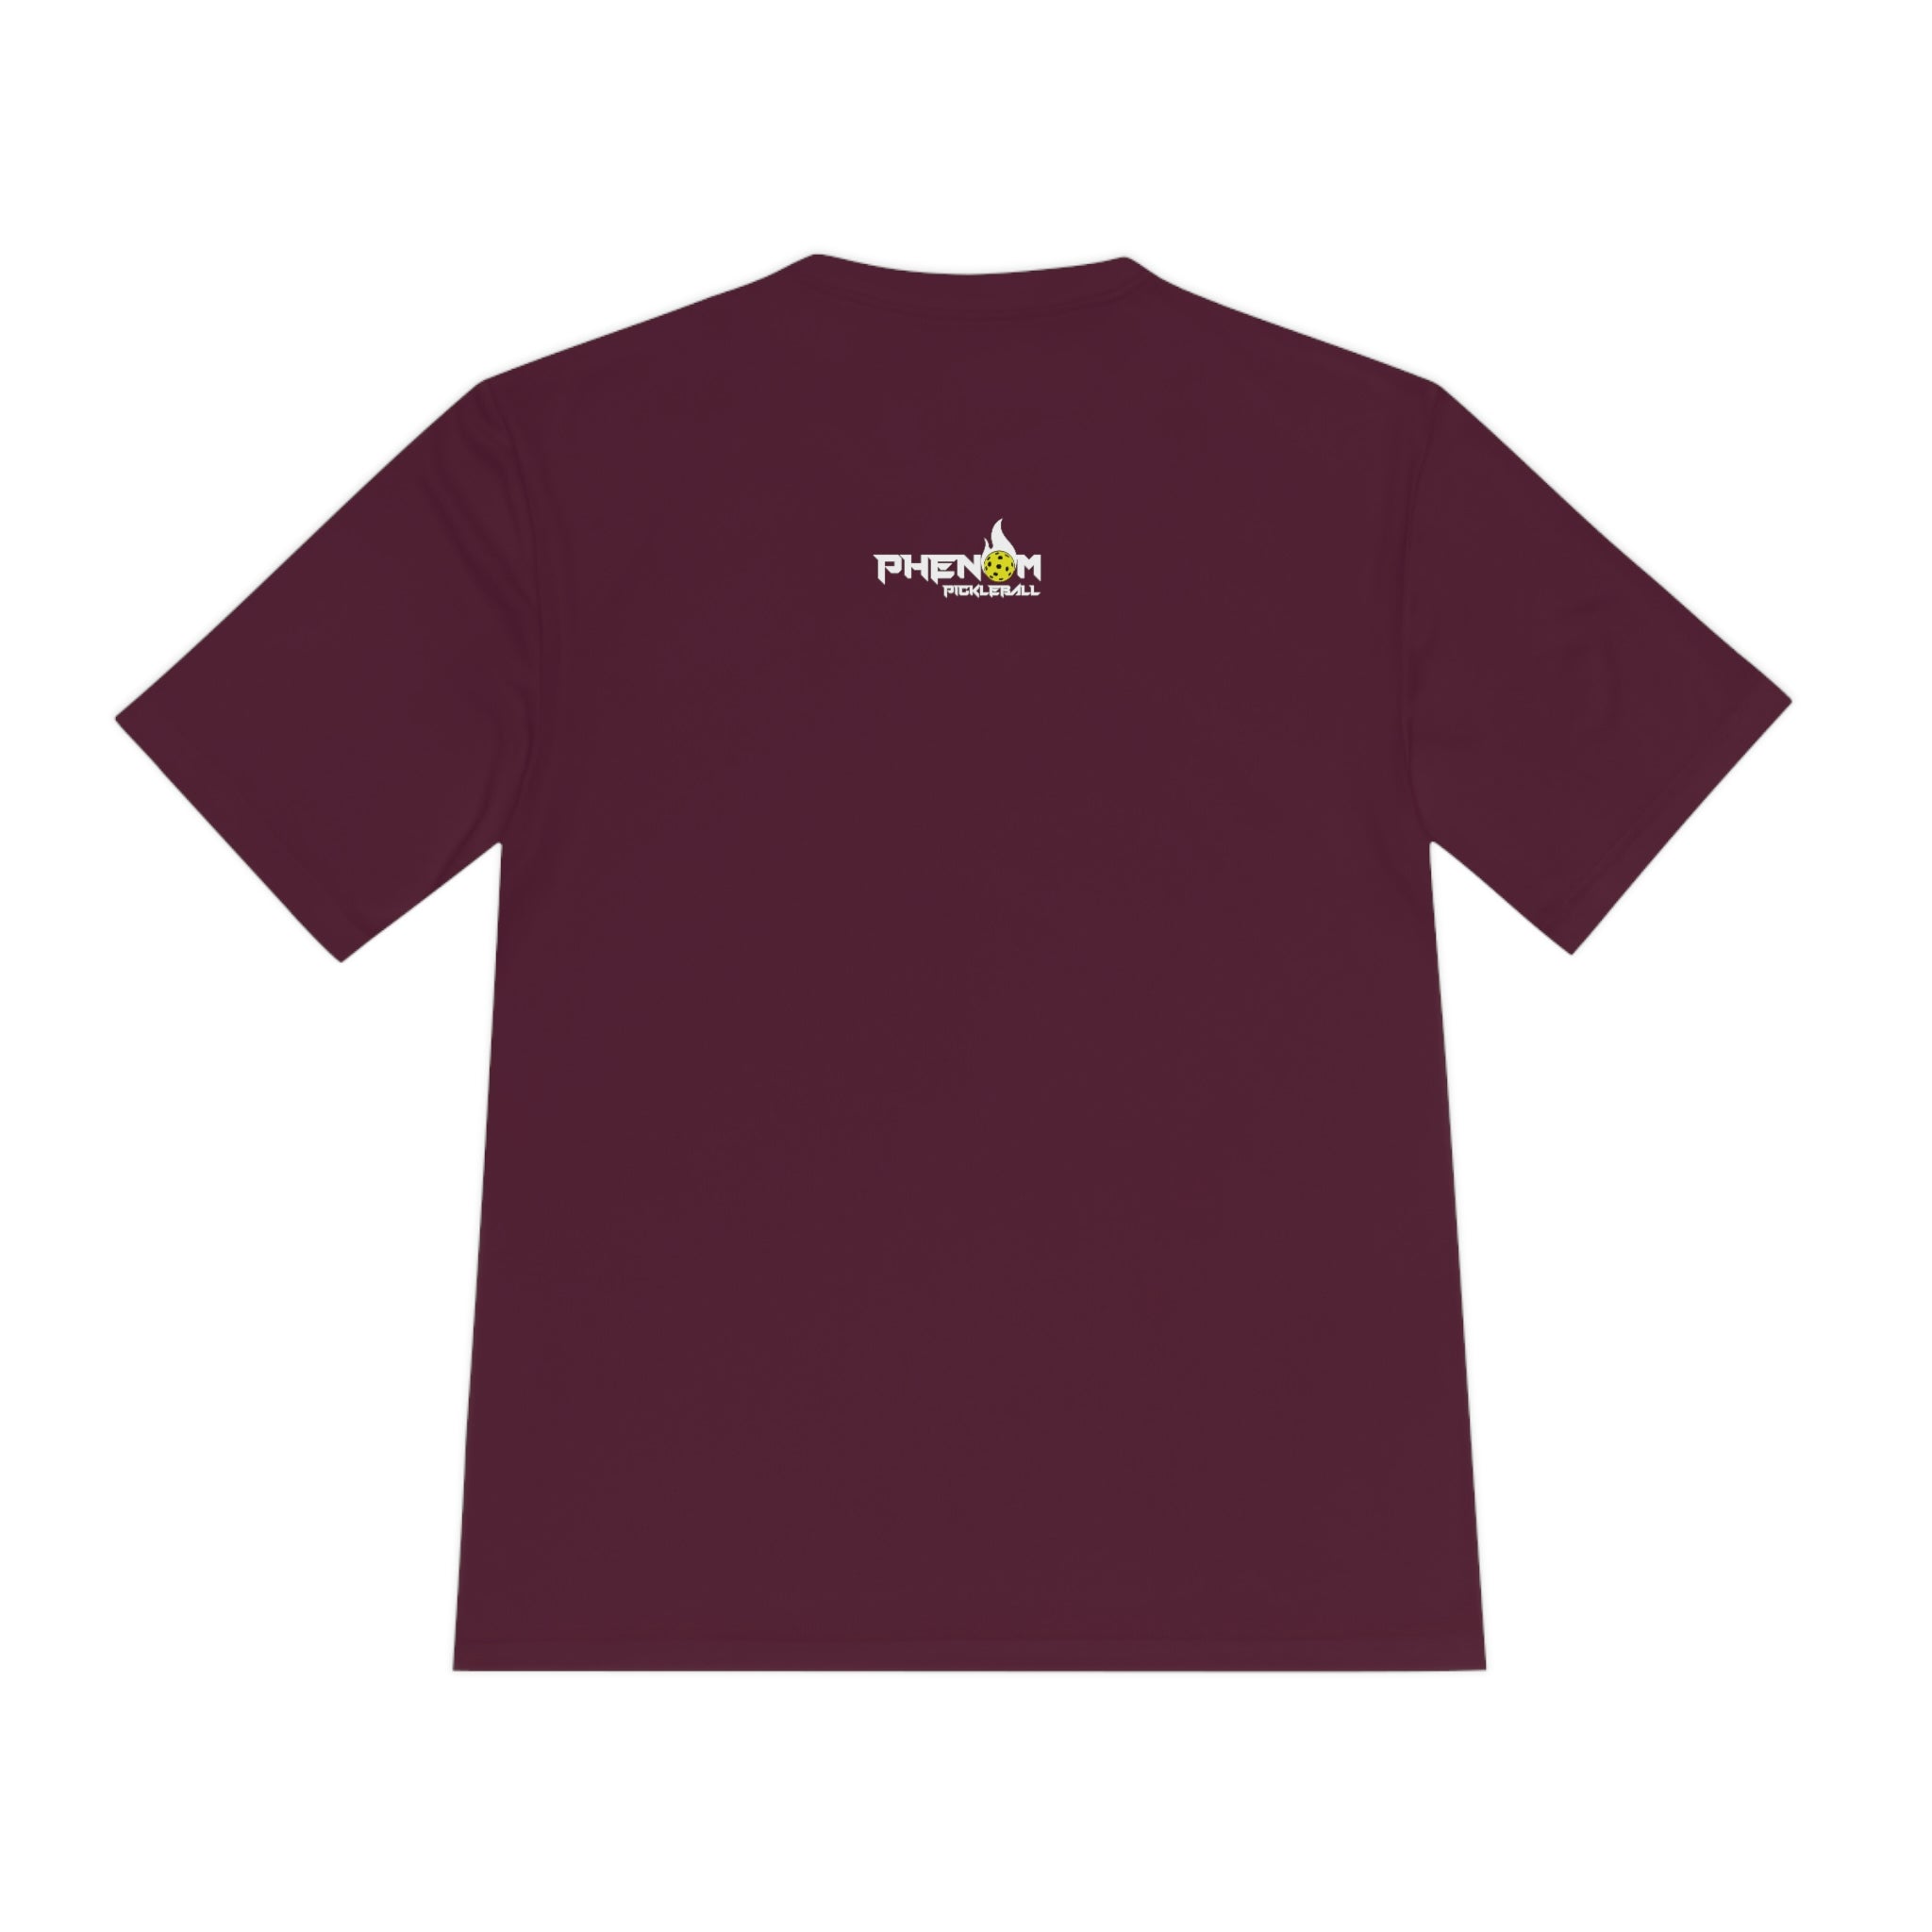 dark maroon burgundy dinks well with others athletic performance pickleball shirt apparel phenom logo back view